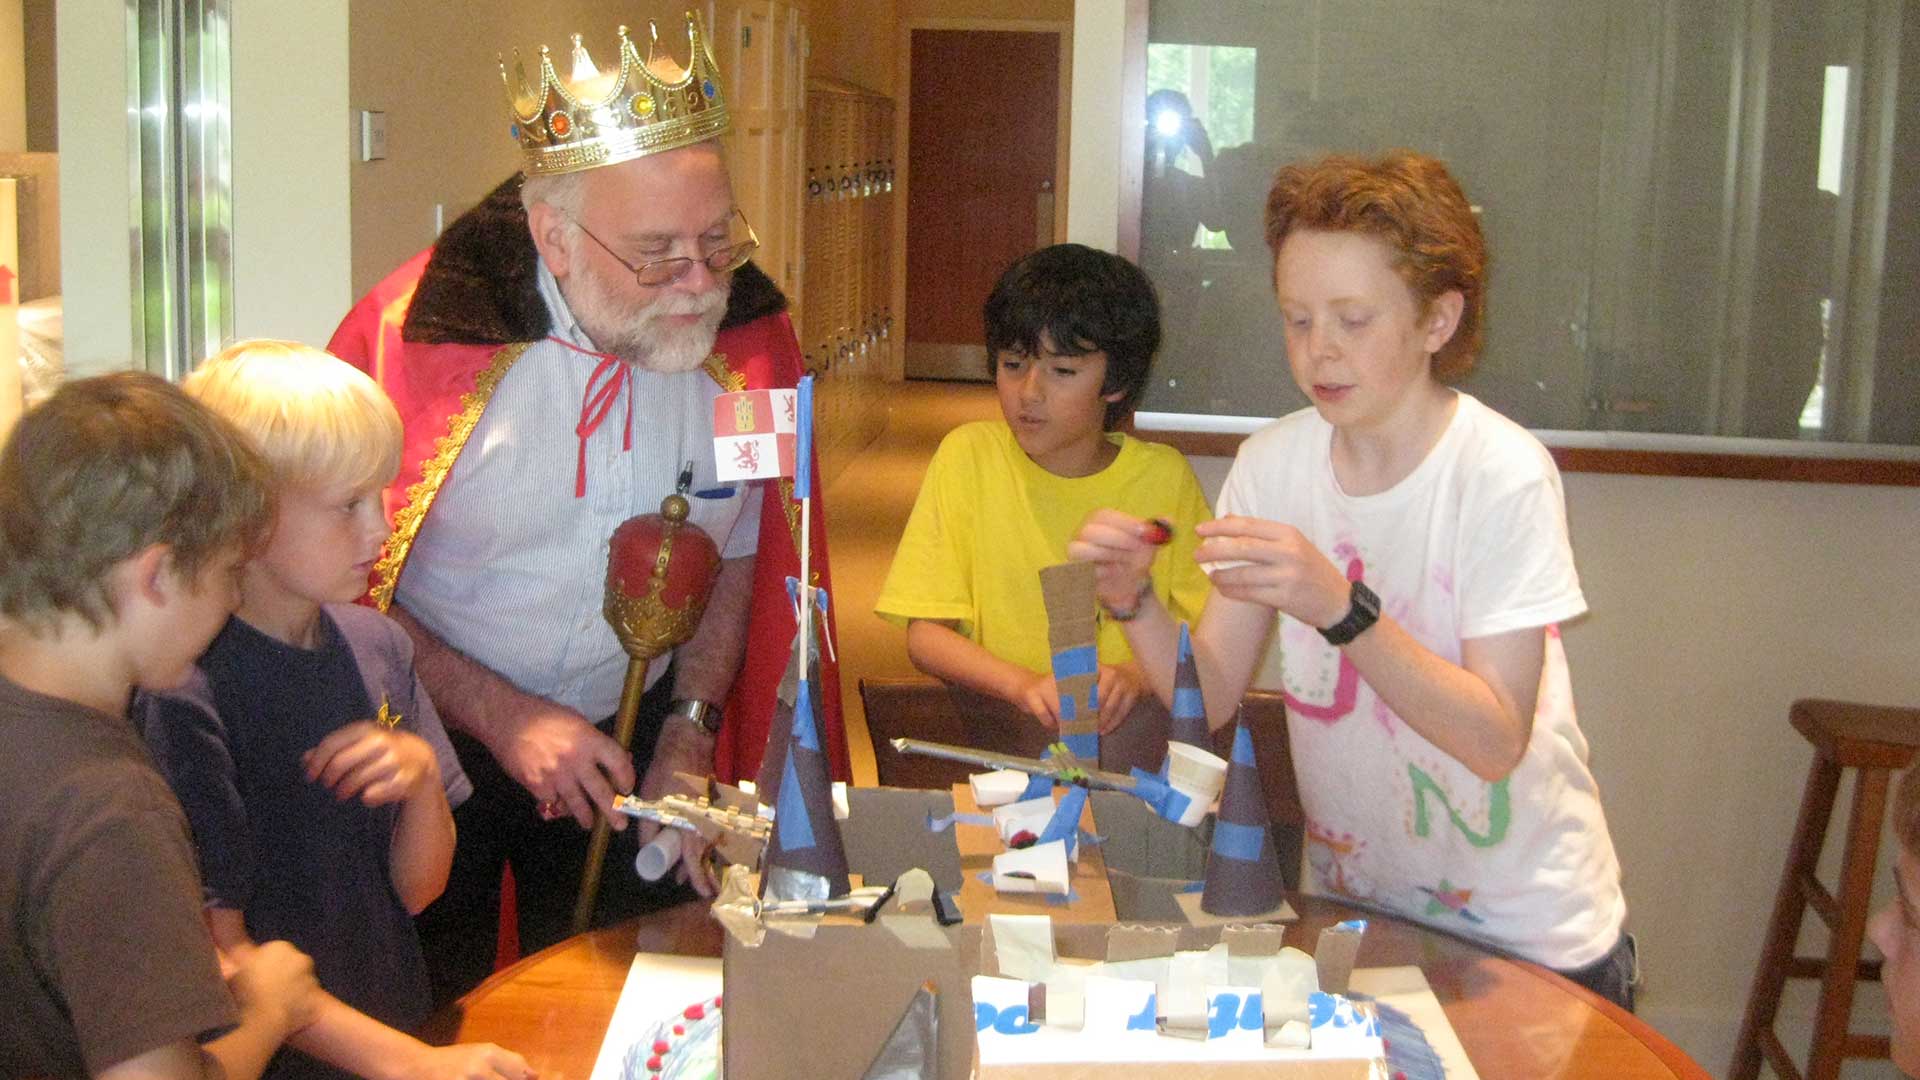 employee dressed as a king examines catapults with kids